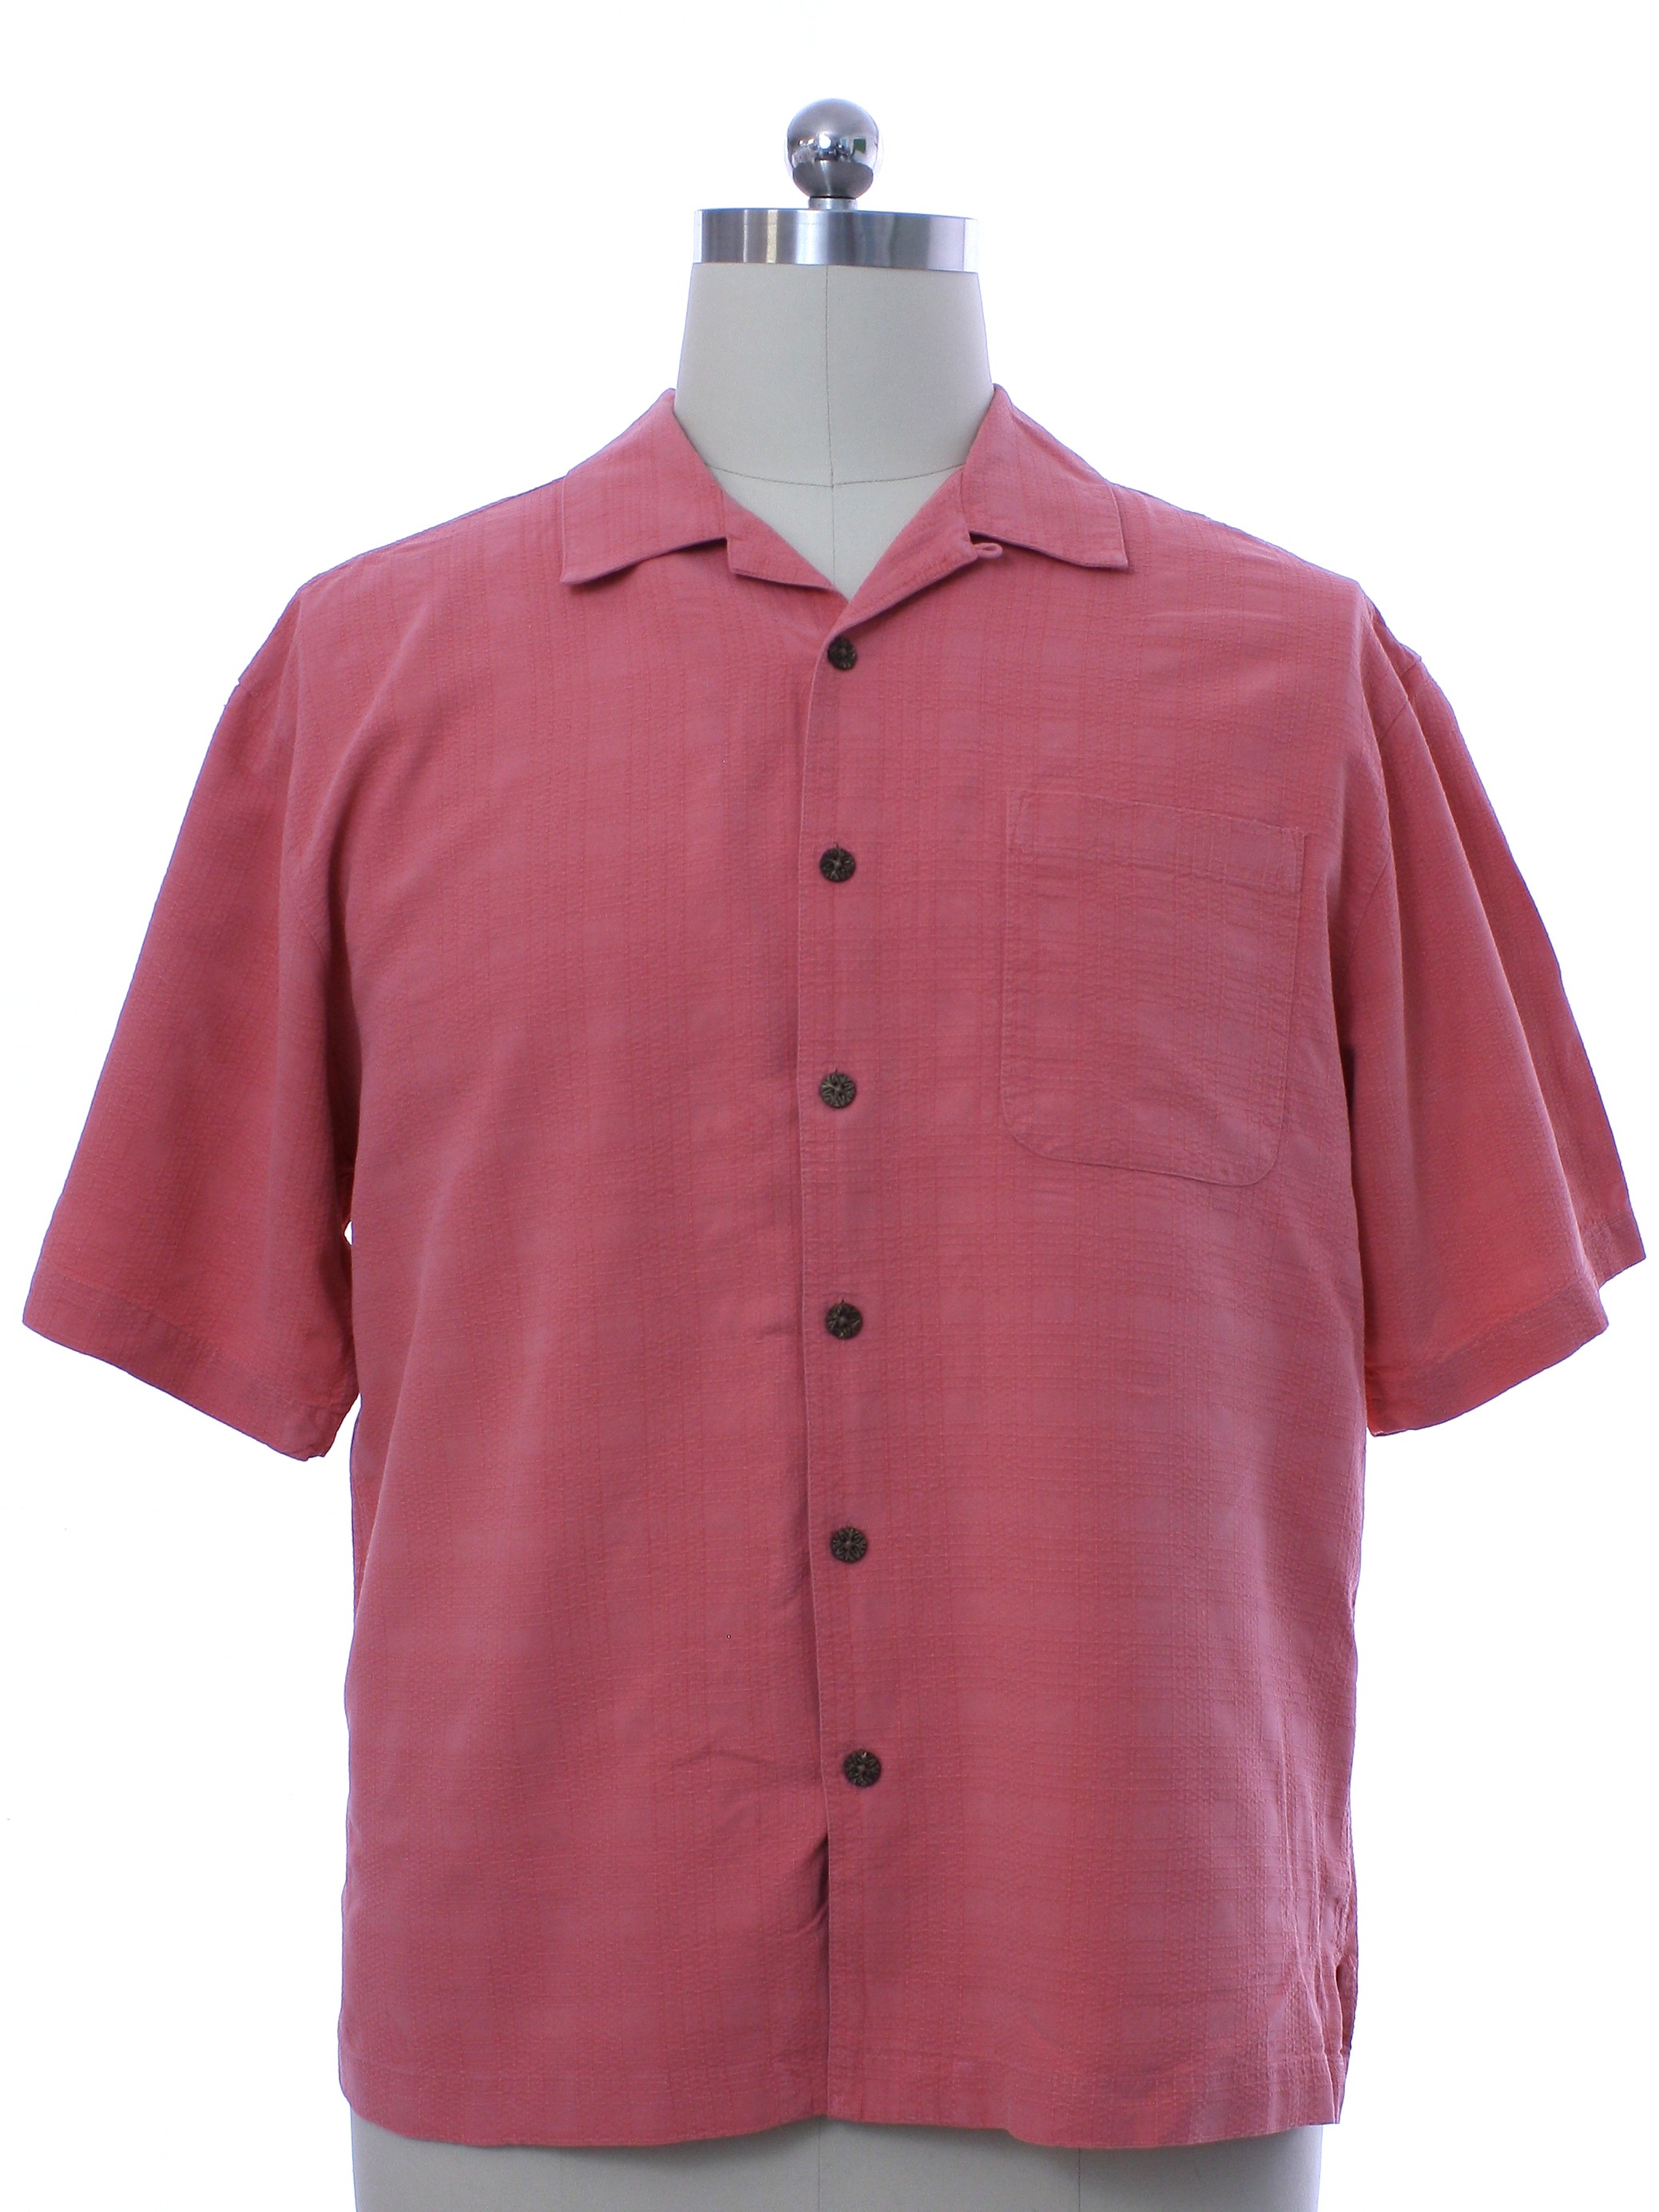 Shirt: 90s -Joseph and Feiss- Mens coral orange background heavy ...